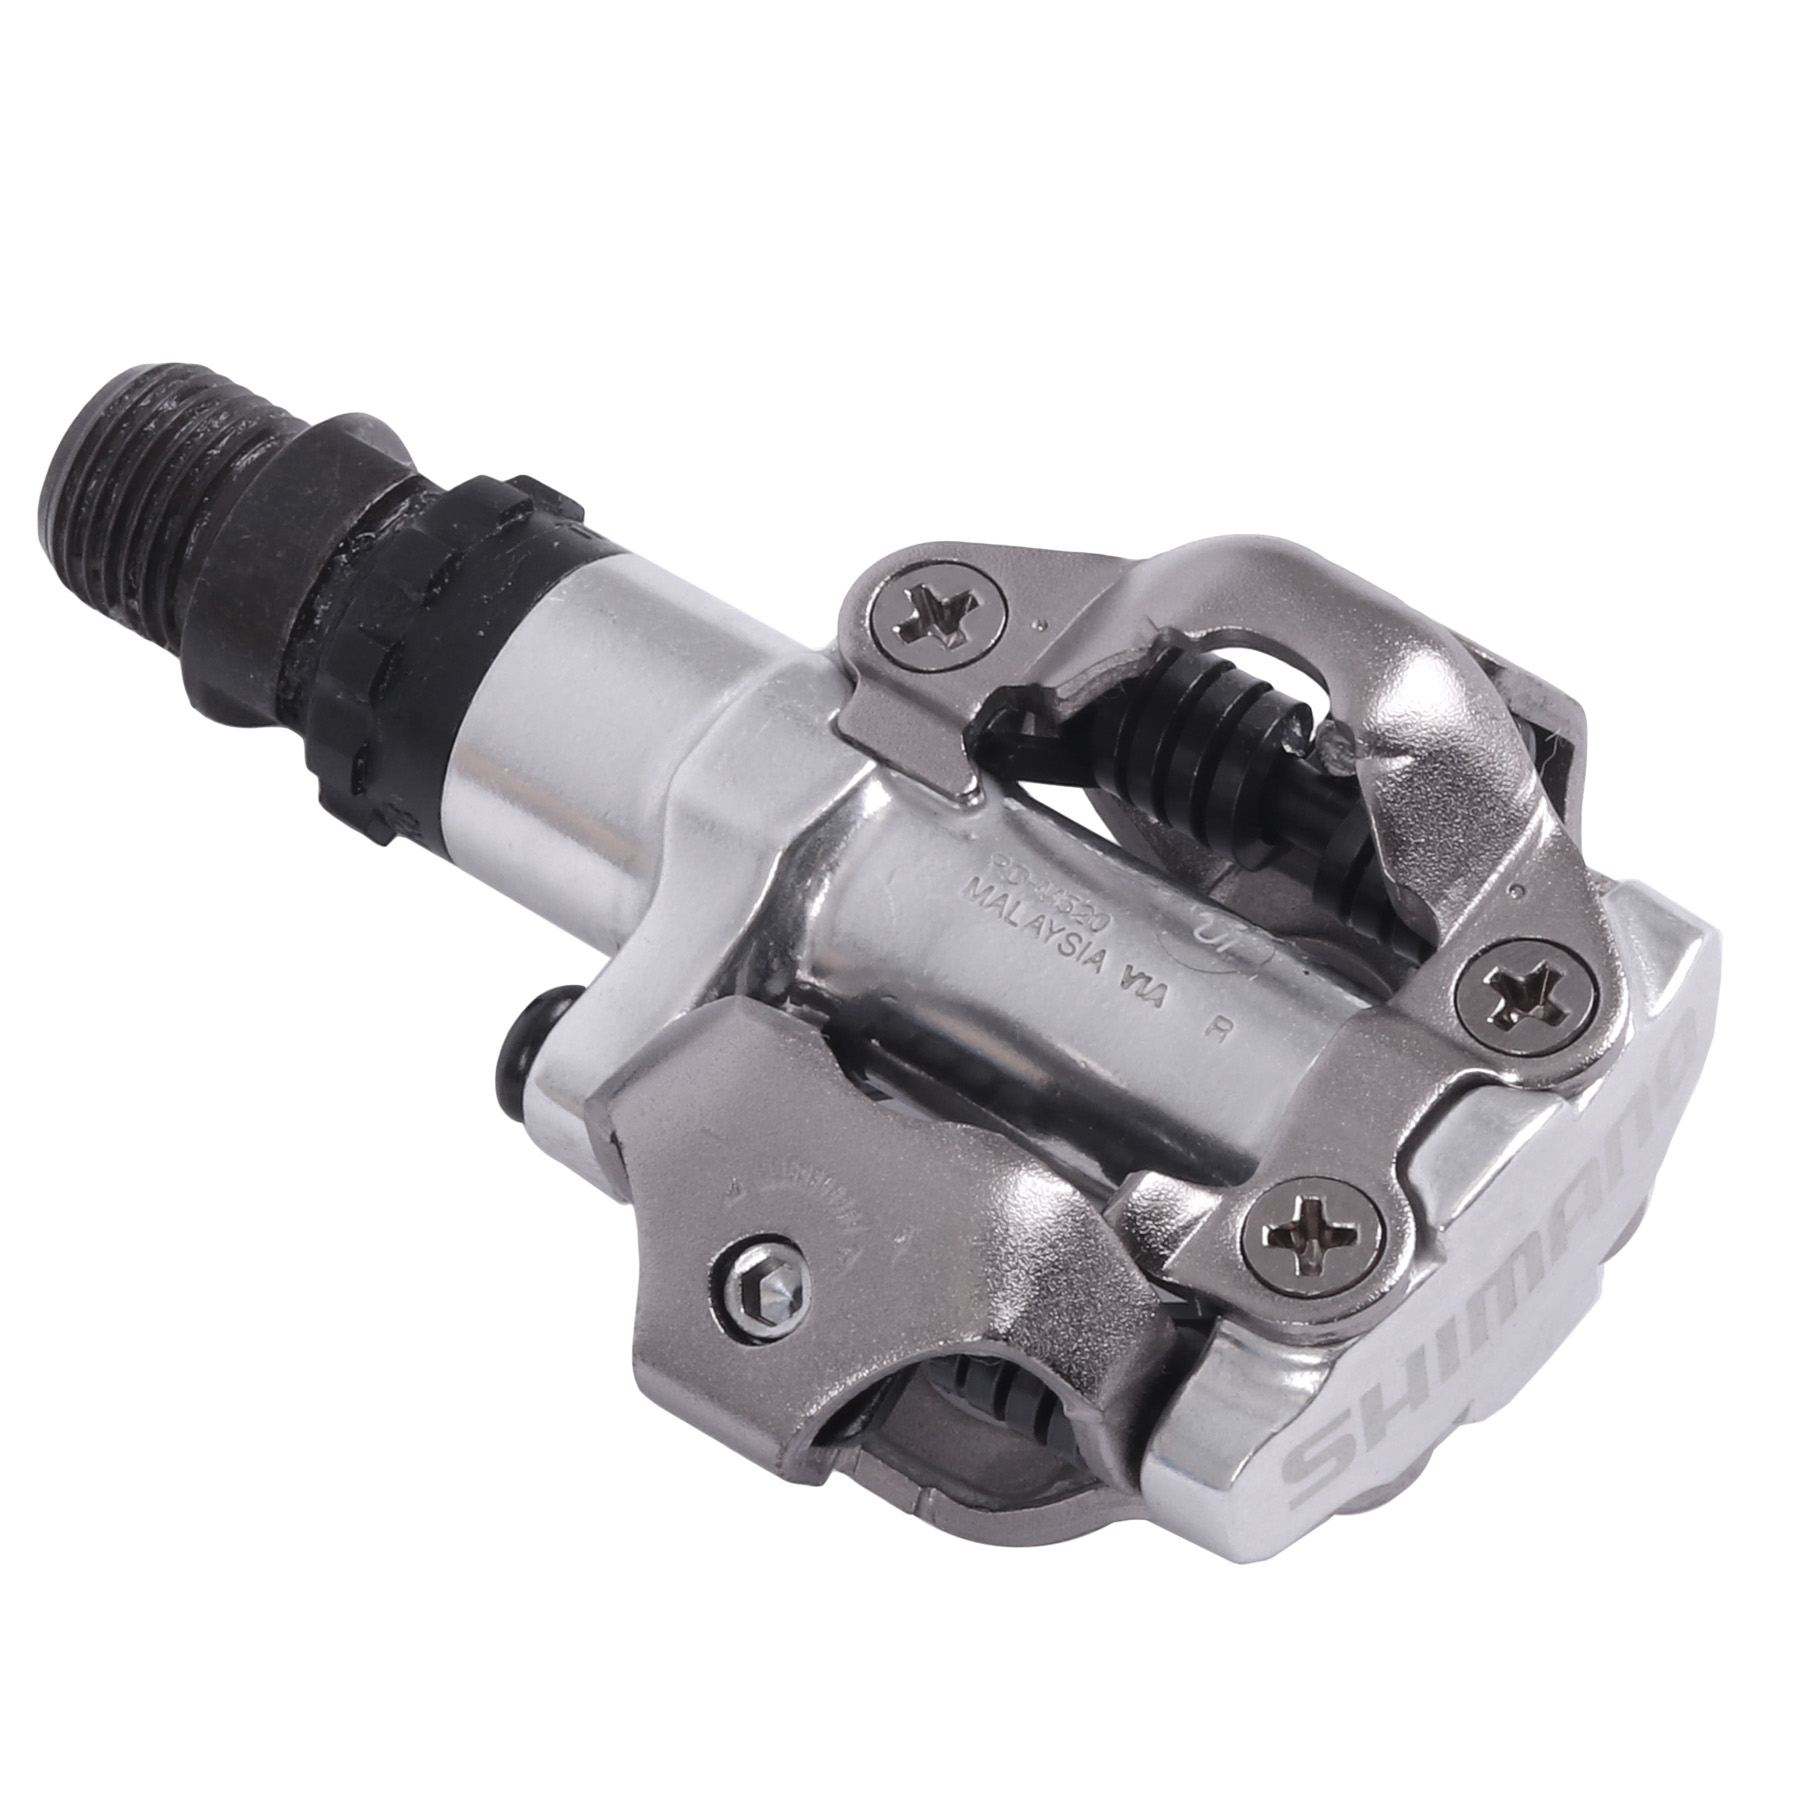 Image of Shimano PD-M520 SPD Pedal - silver